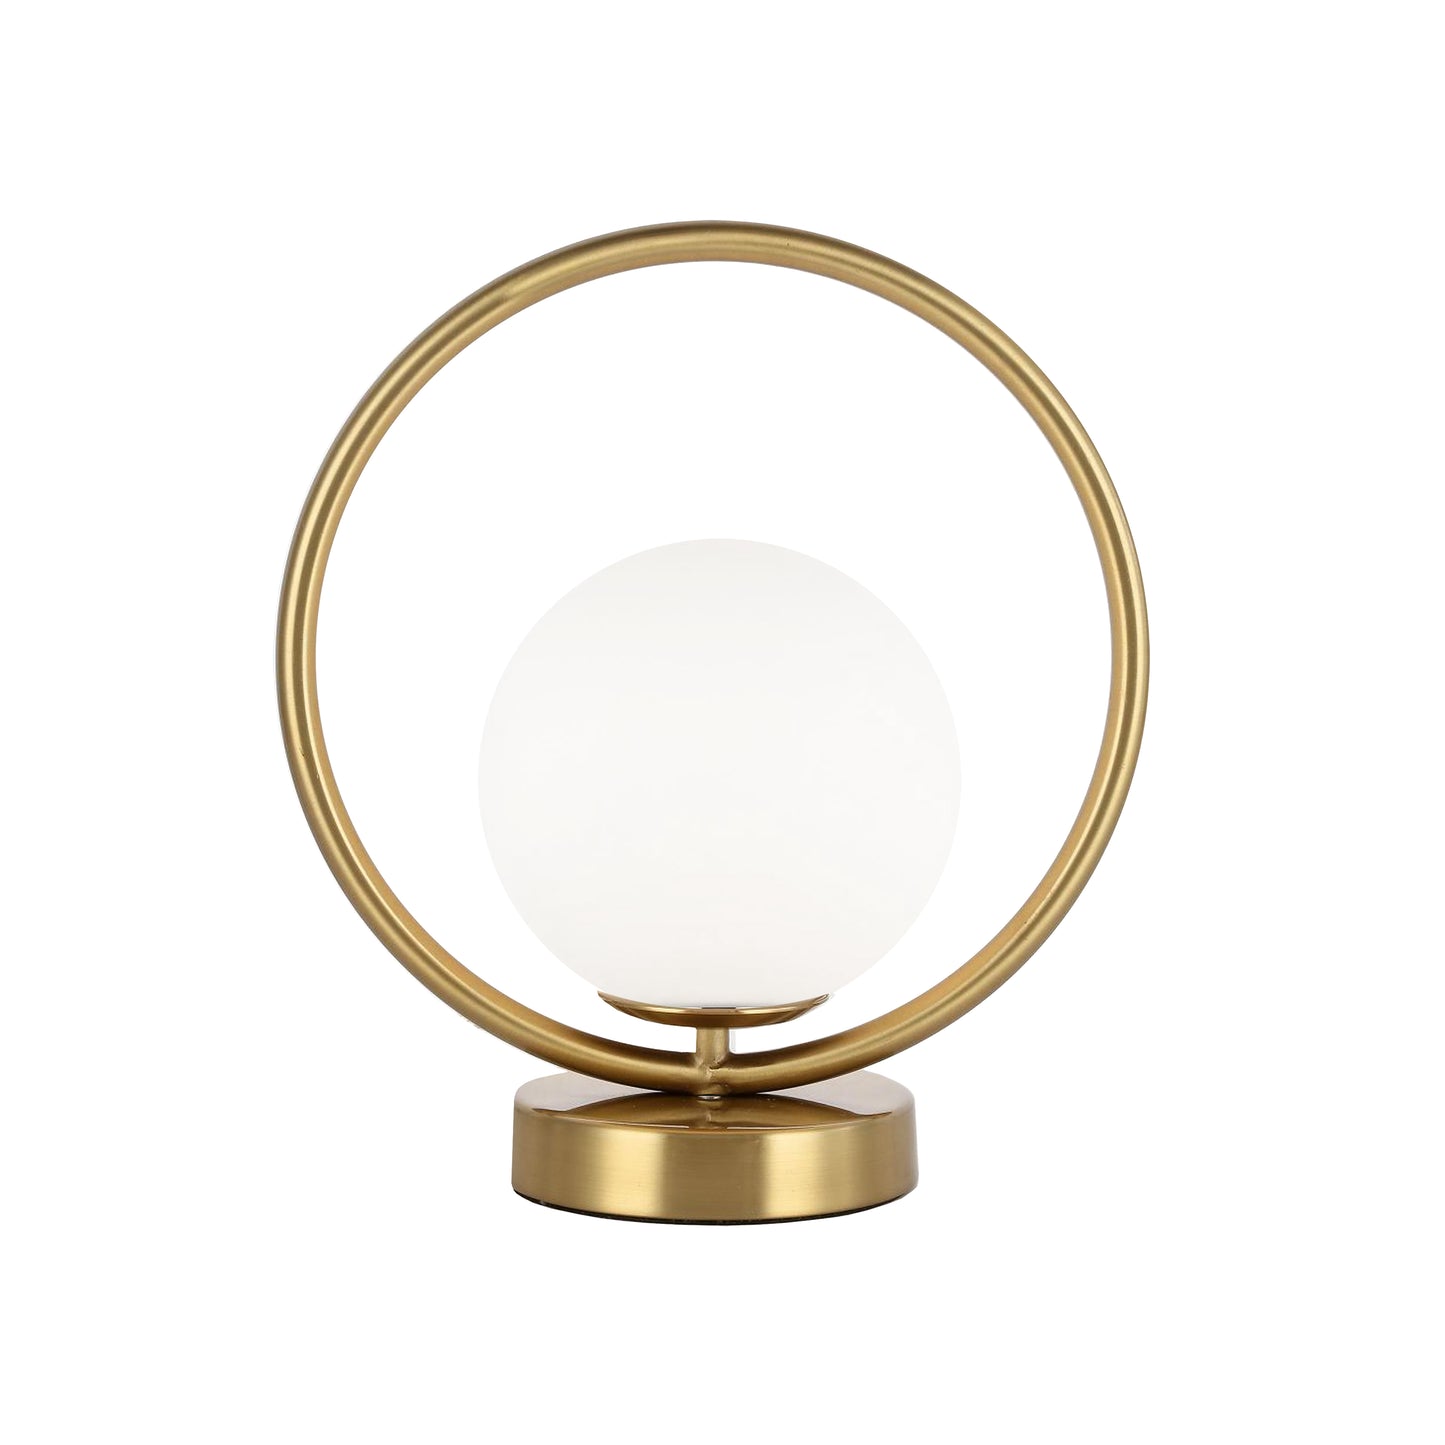 Dainolite ADR-101T-AGB 1 Light Halogen Table Lamp Aged Brass Finish with White Glass